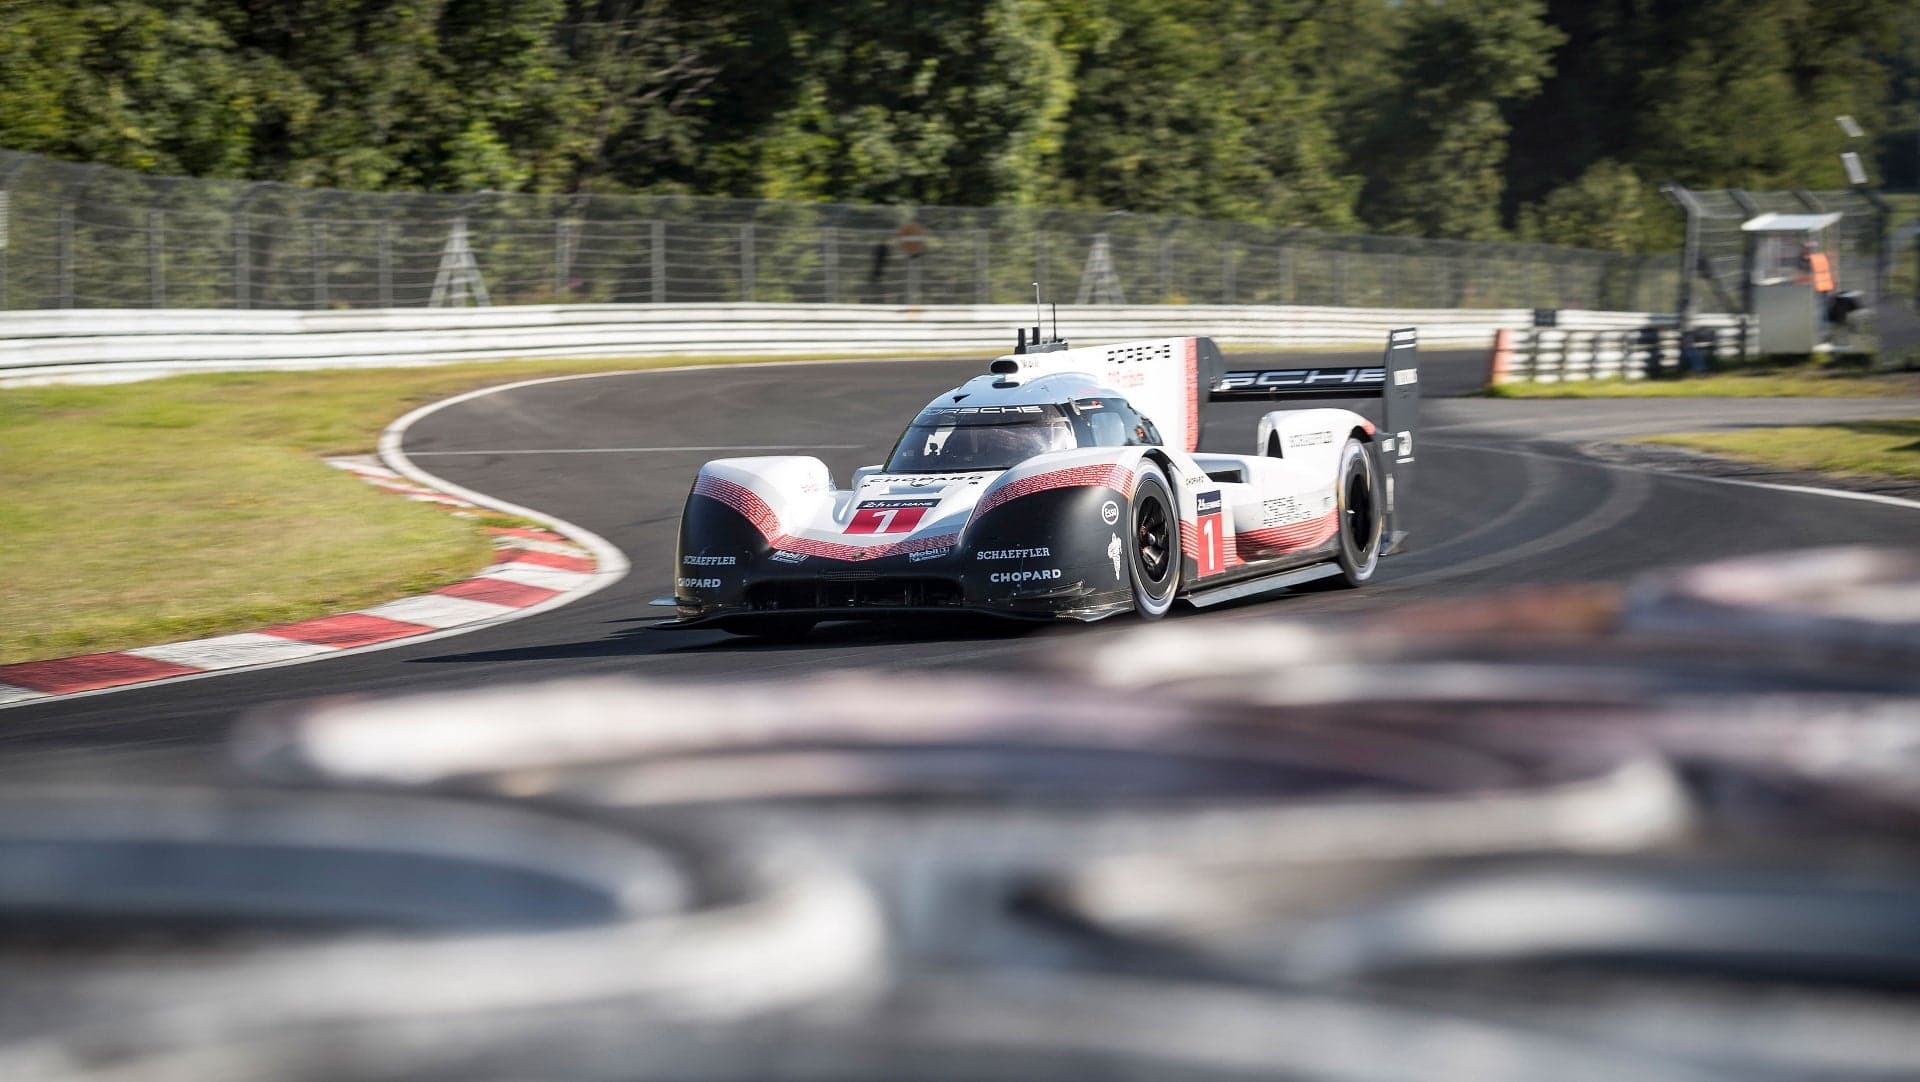 Porsche 919 Hybrid Evo Sets All-Time Nurburgring Lap Record at 5:19.55